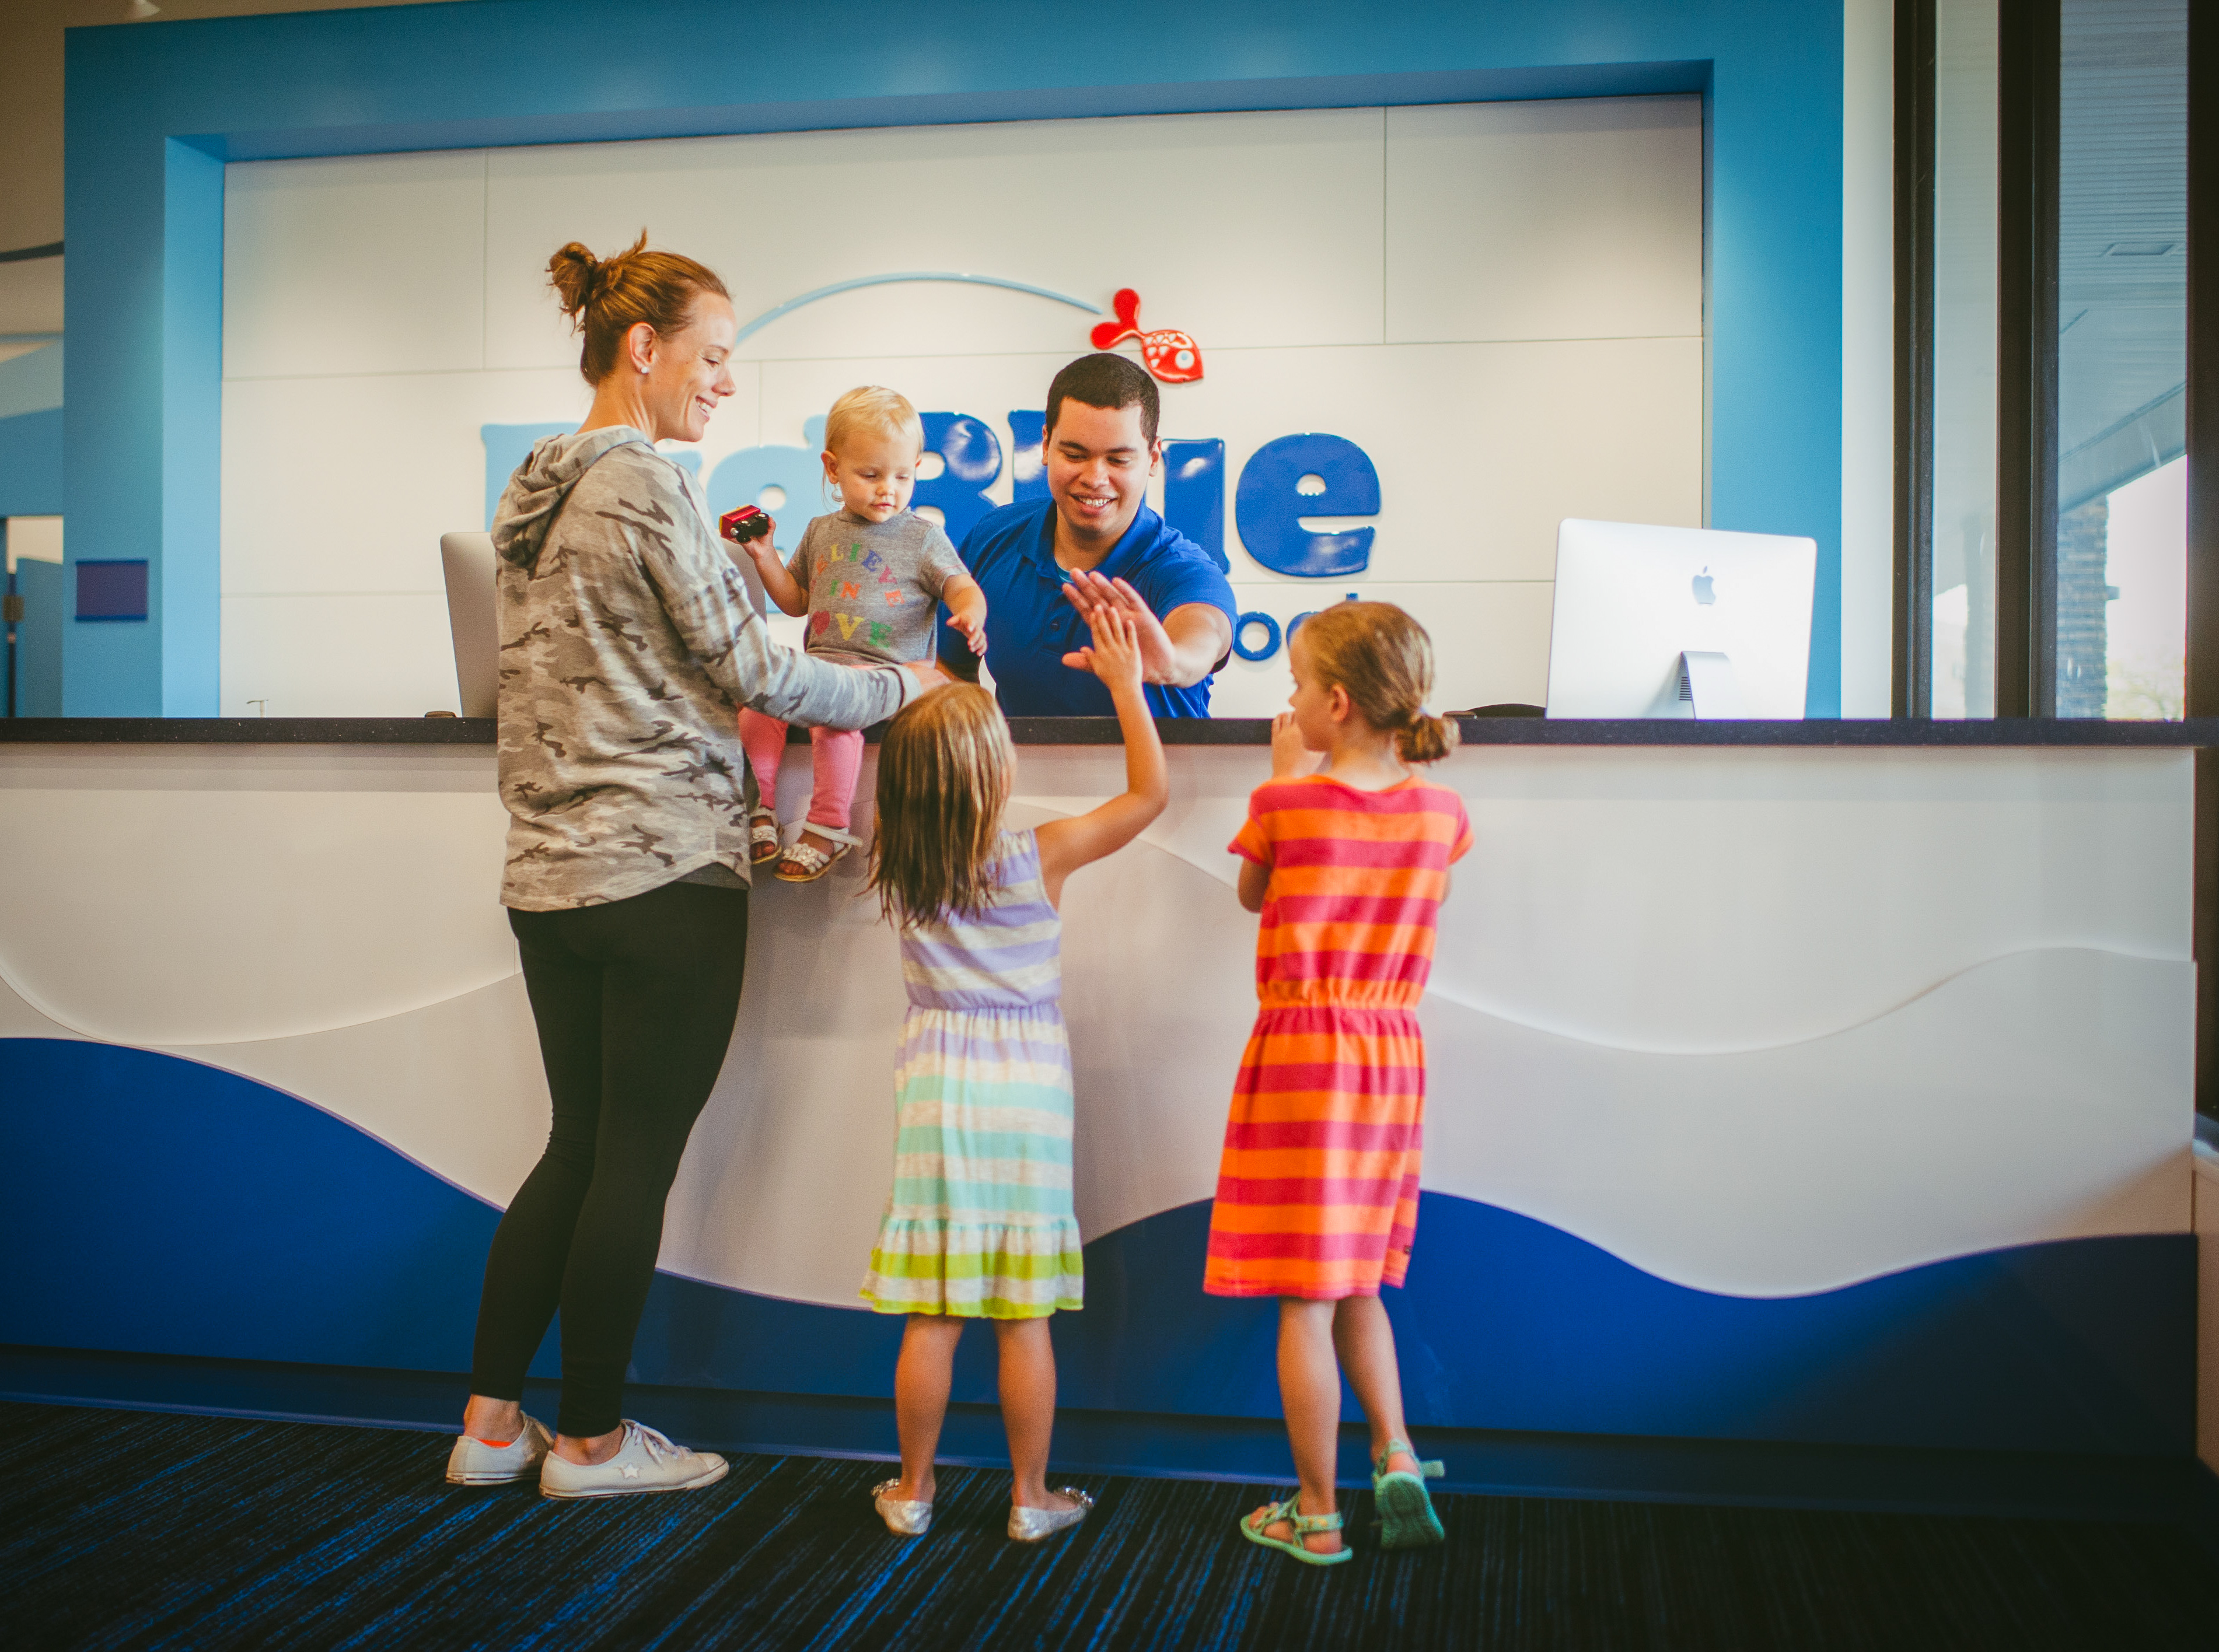 Big Blue Swim School's friendly front desk staff helps a family prepare for their swimming lessons